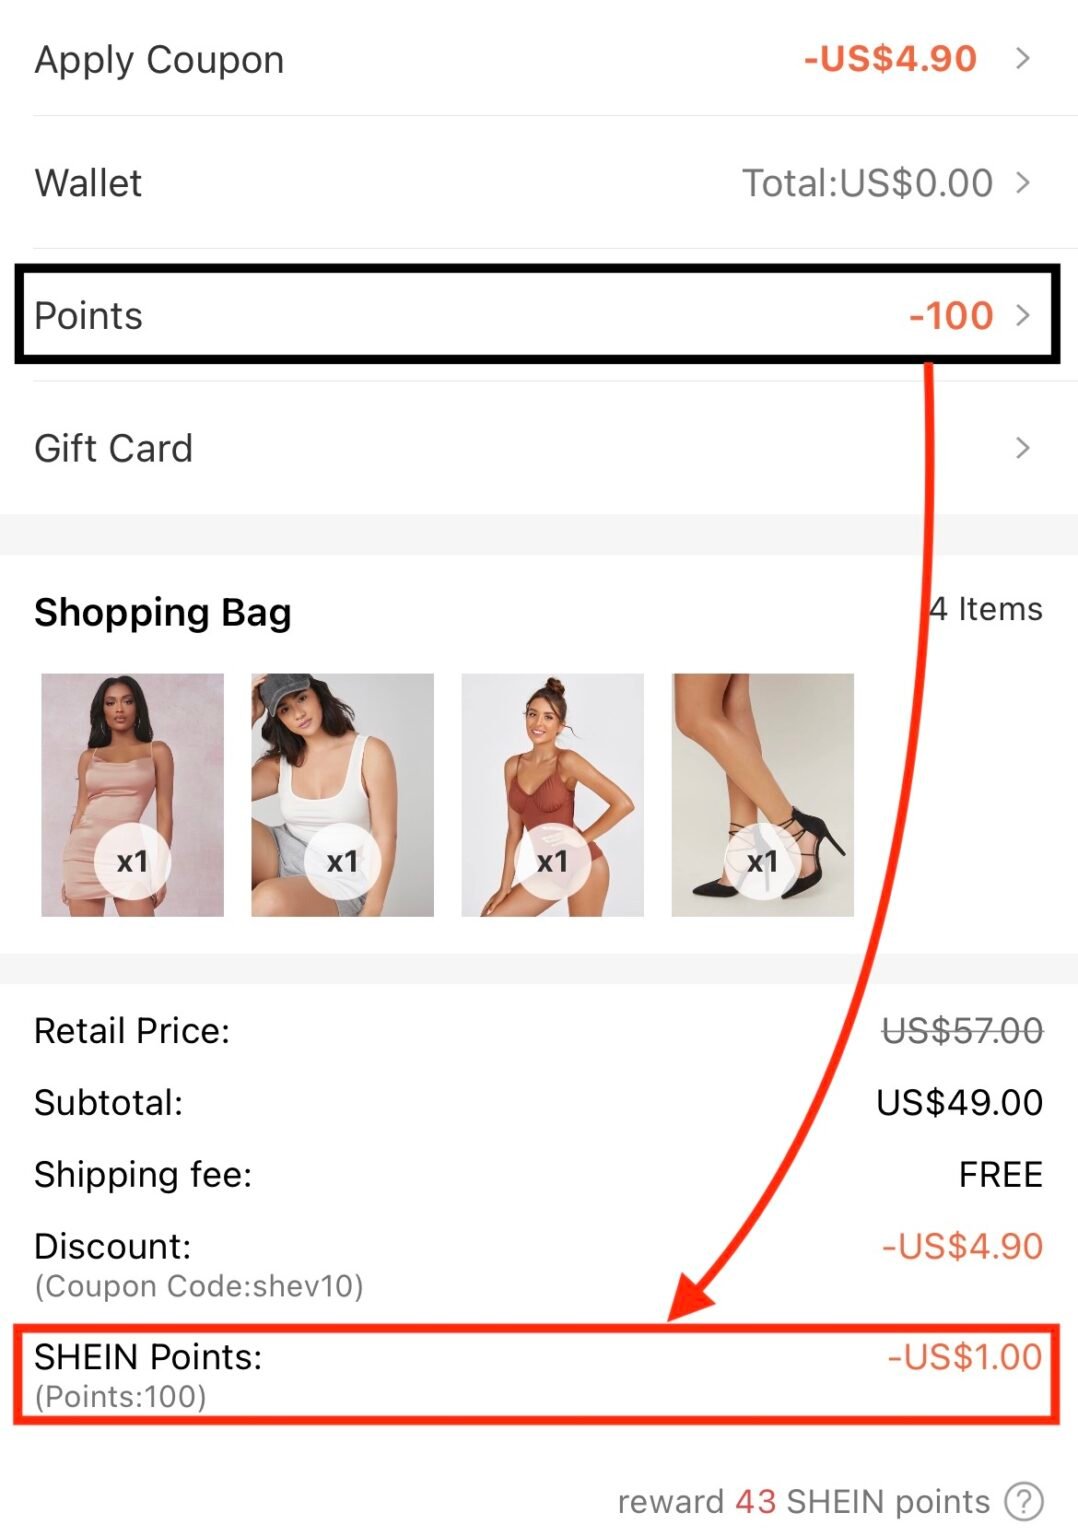 What are Shein points and HACKS to get more